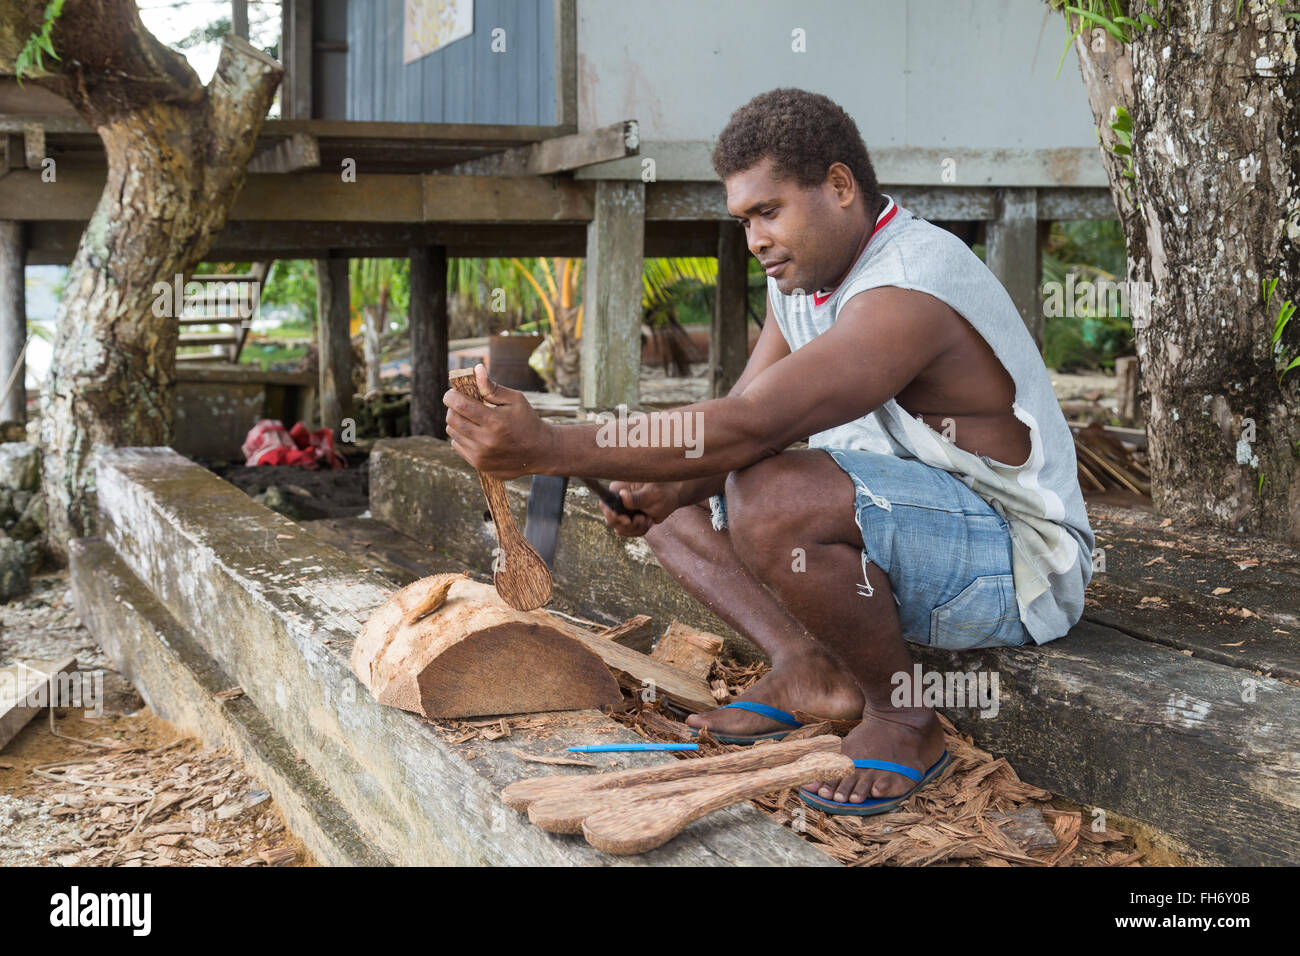 Chea Village, Solomon Islands - June 15, 2015: A man is woodcarving a spoon. Wood carving is typical for the Marovo Lagoon. Stock Photo